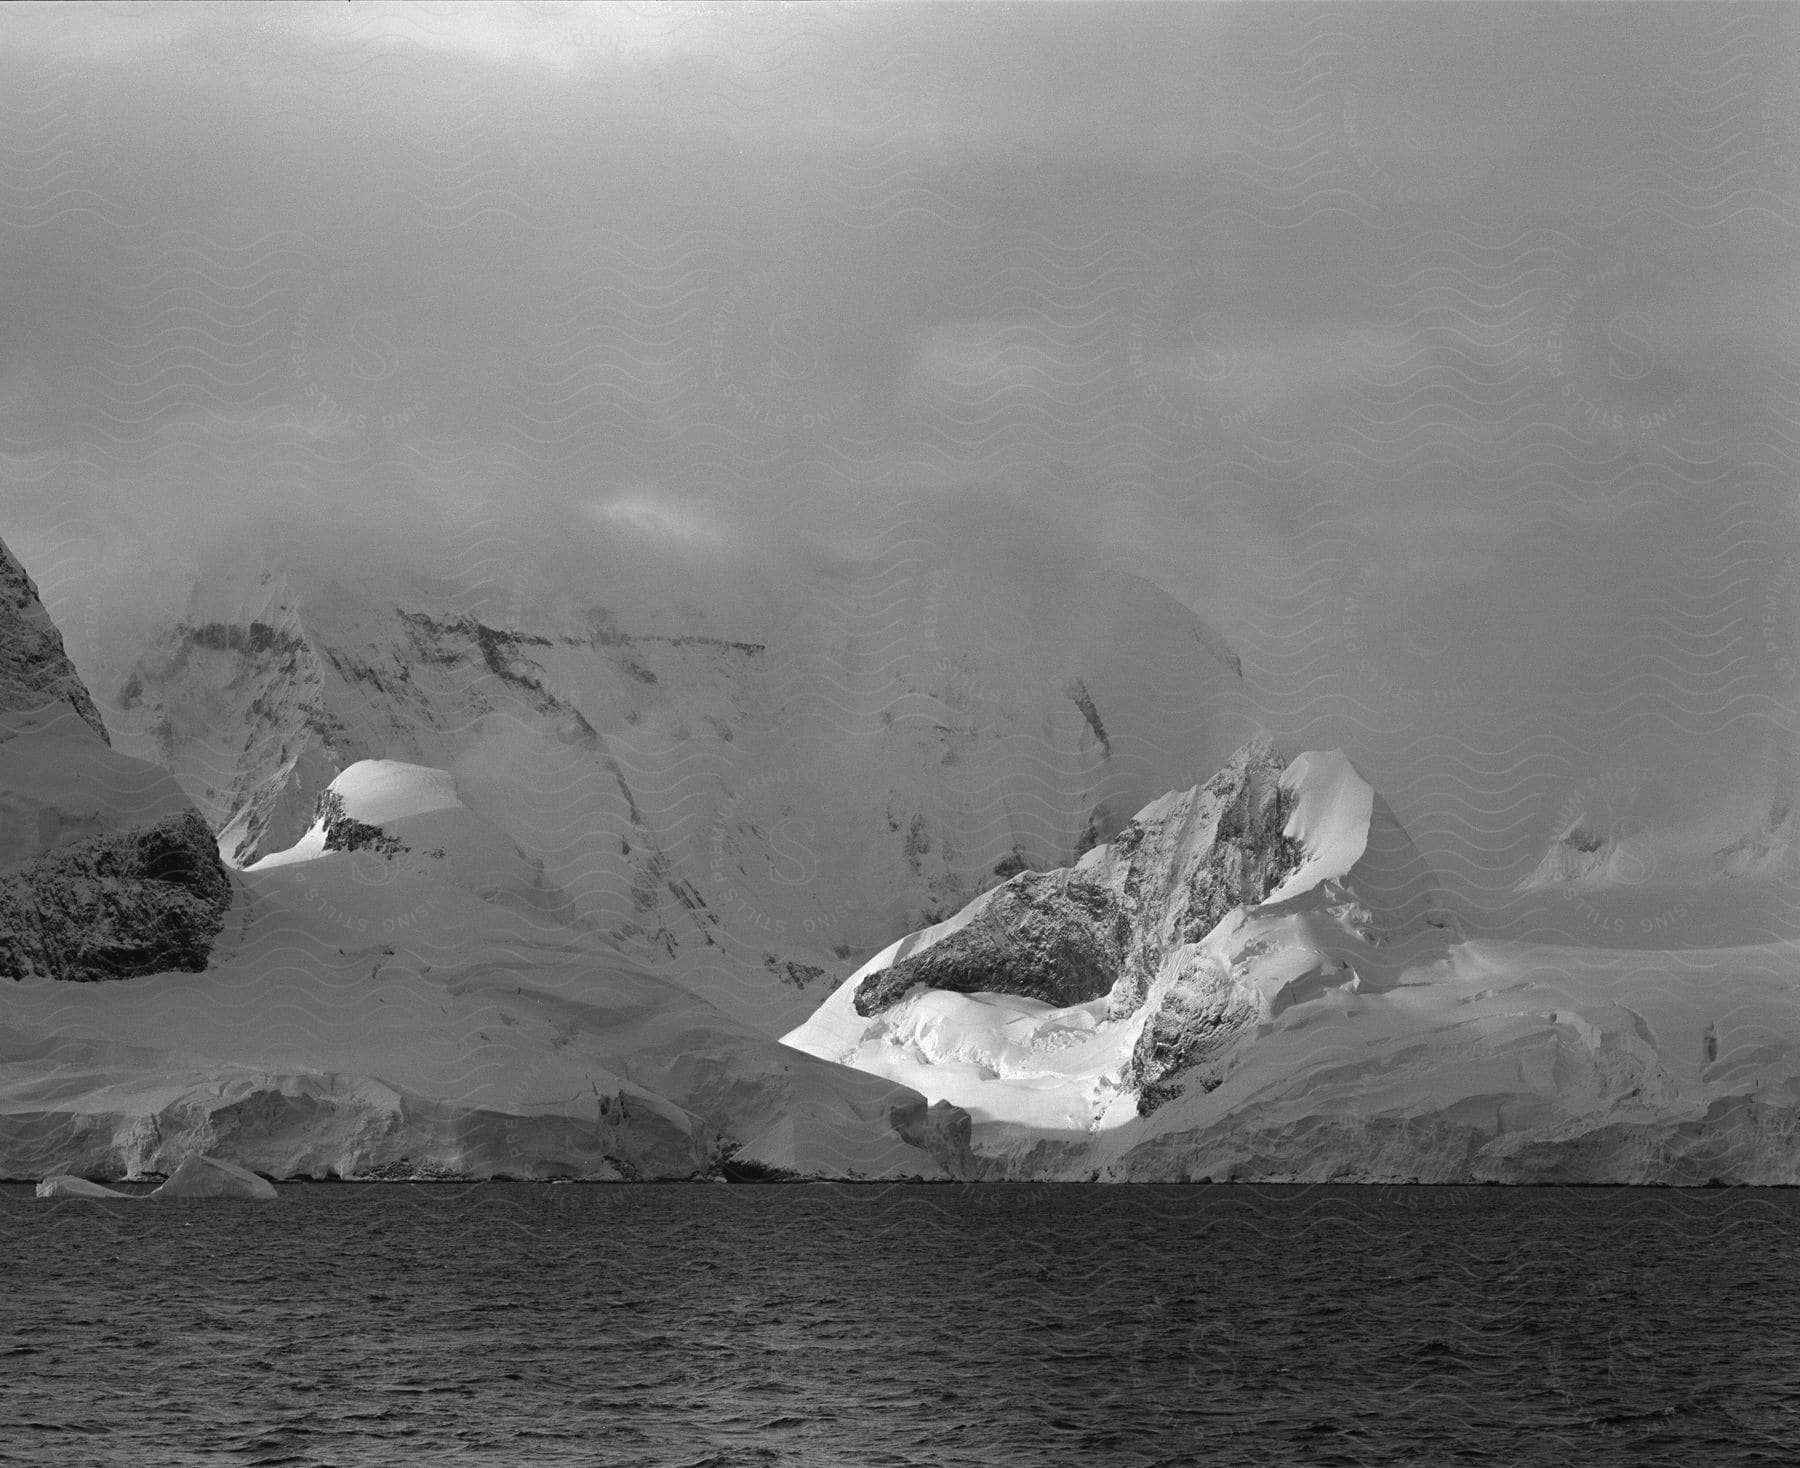 Snowcovered mountains meet the ocean in this blackandwhite photograph of the antarctic peninsula